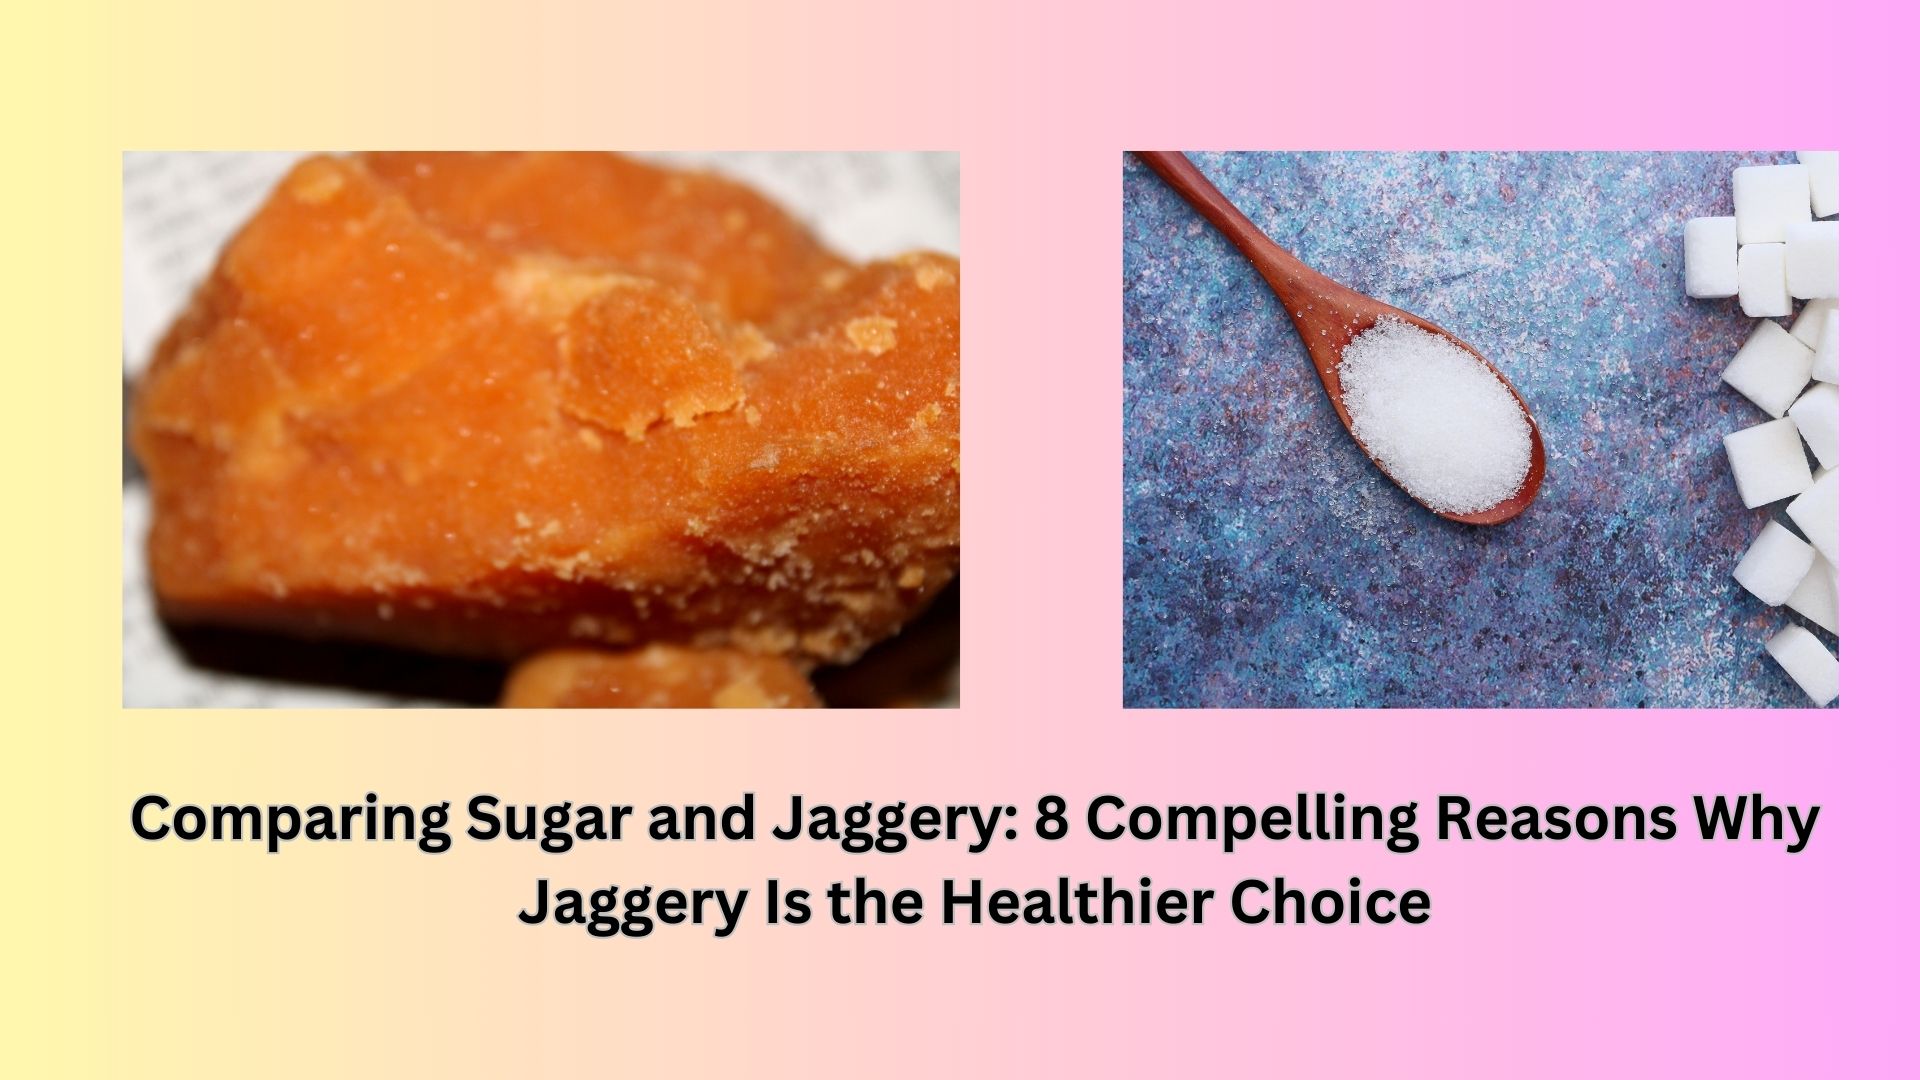 Comparing Sugar and Jaggery: 8 Compelling Reasons Why Jaggery Is the Healthier Choice